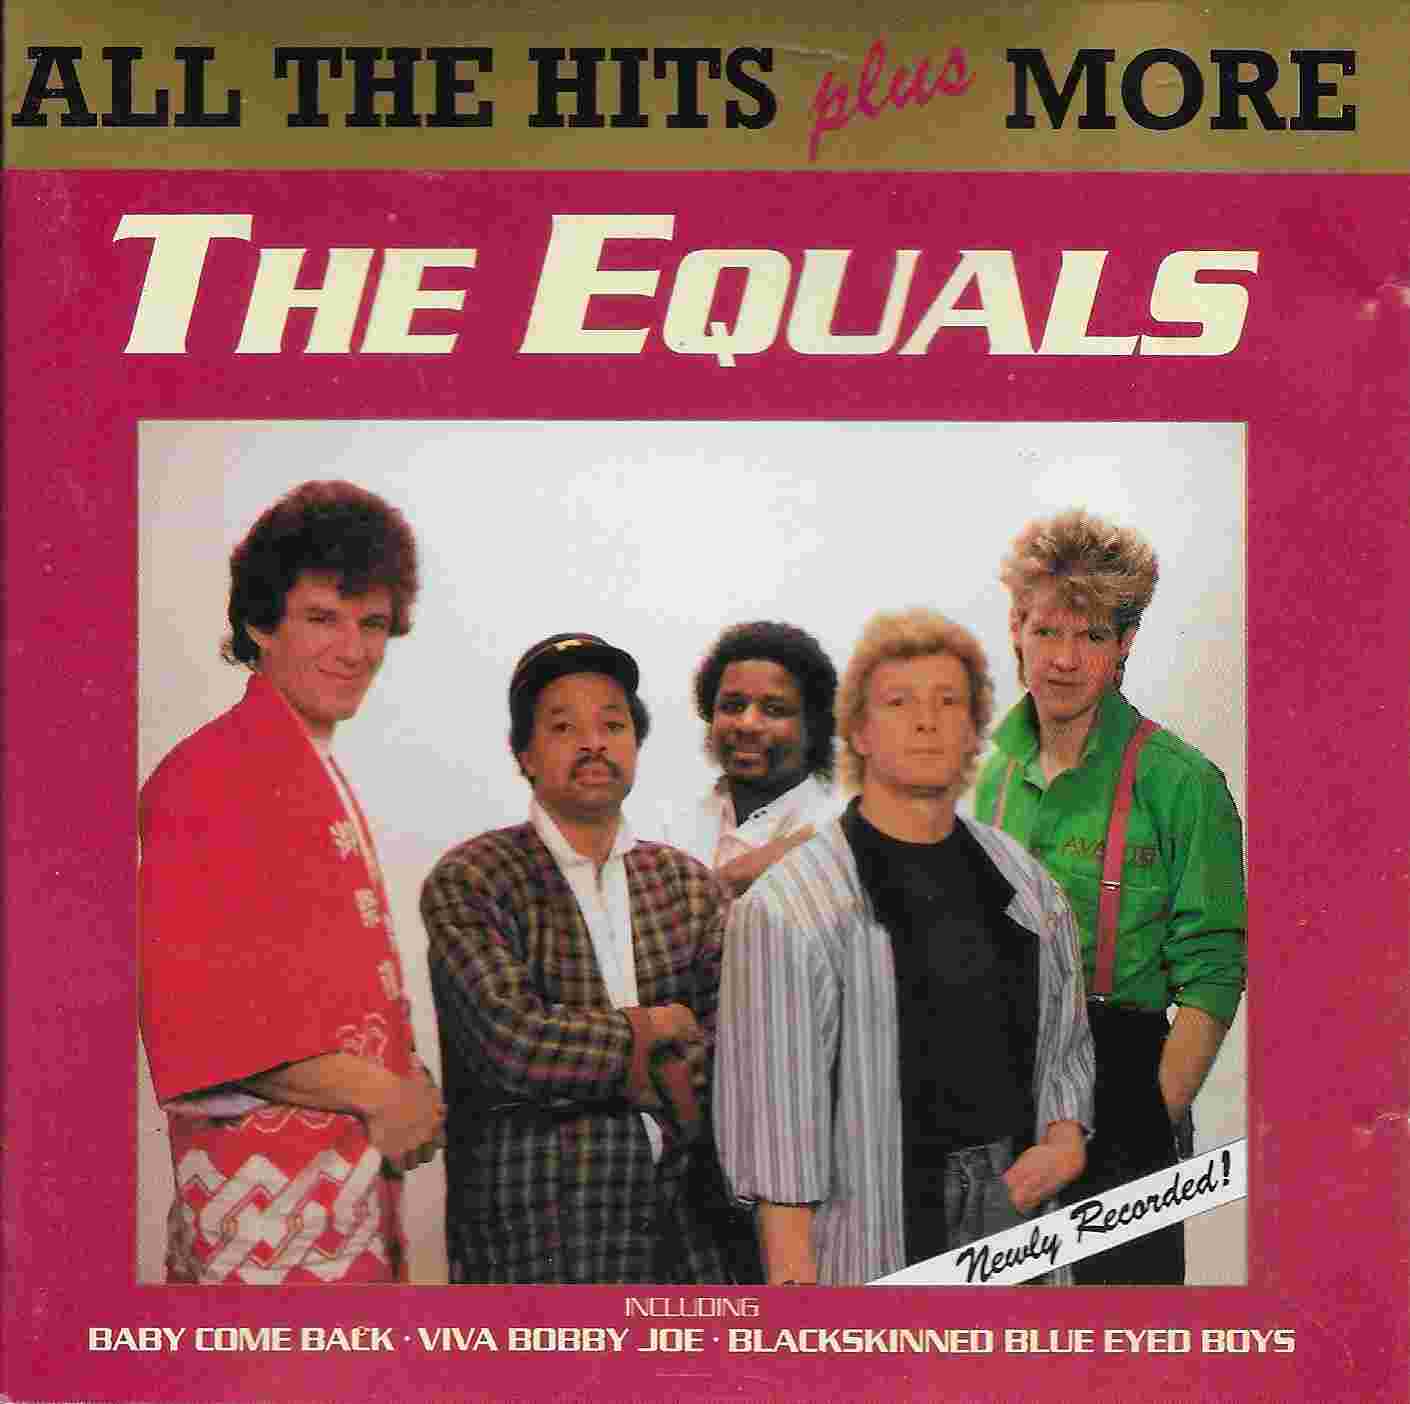 Picture of CDPT 001 All the hits plus more by artist The Equals from the BBC cds - Records and Tapes library